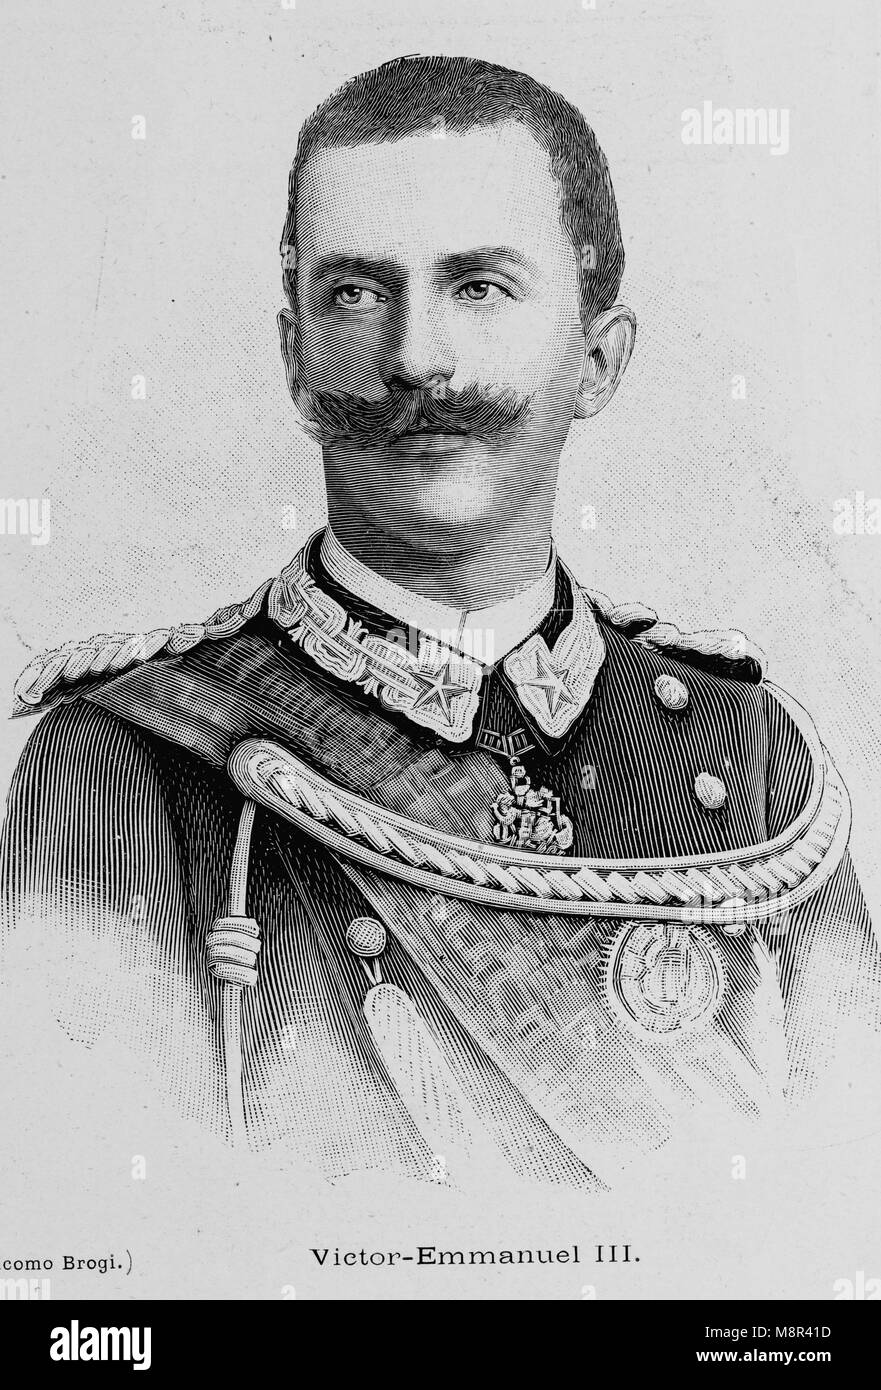 King Victor Emmanuel III of Italy, Picture from the French weekly newspaper l'Illustration, 4th August 1900 Stock Photo